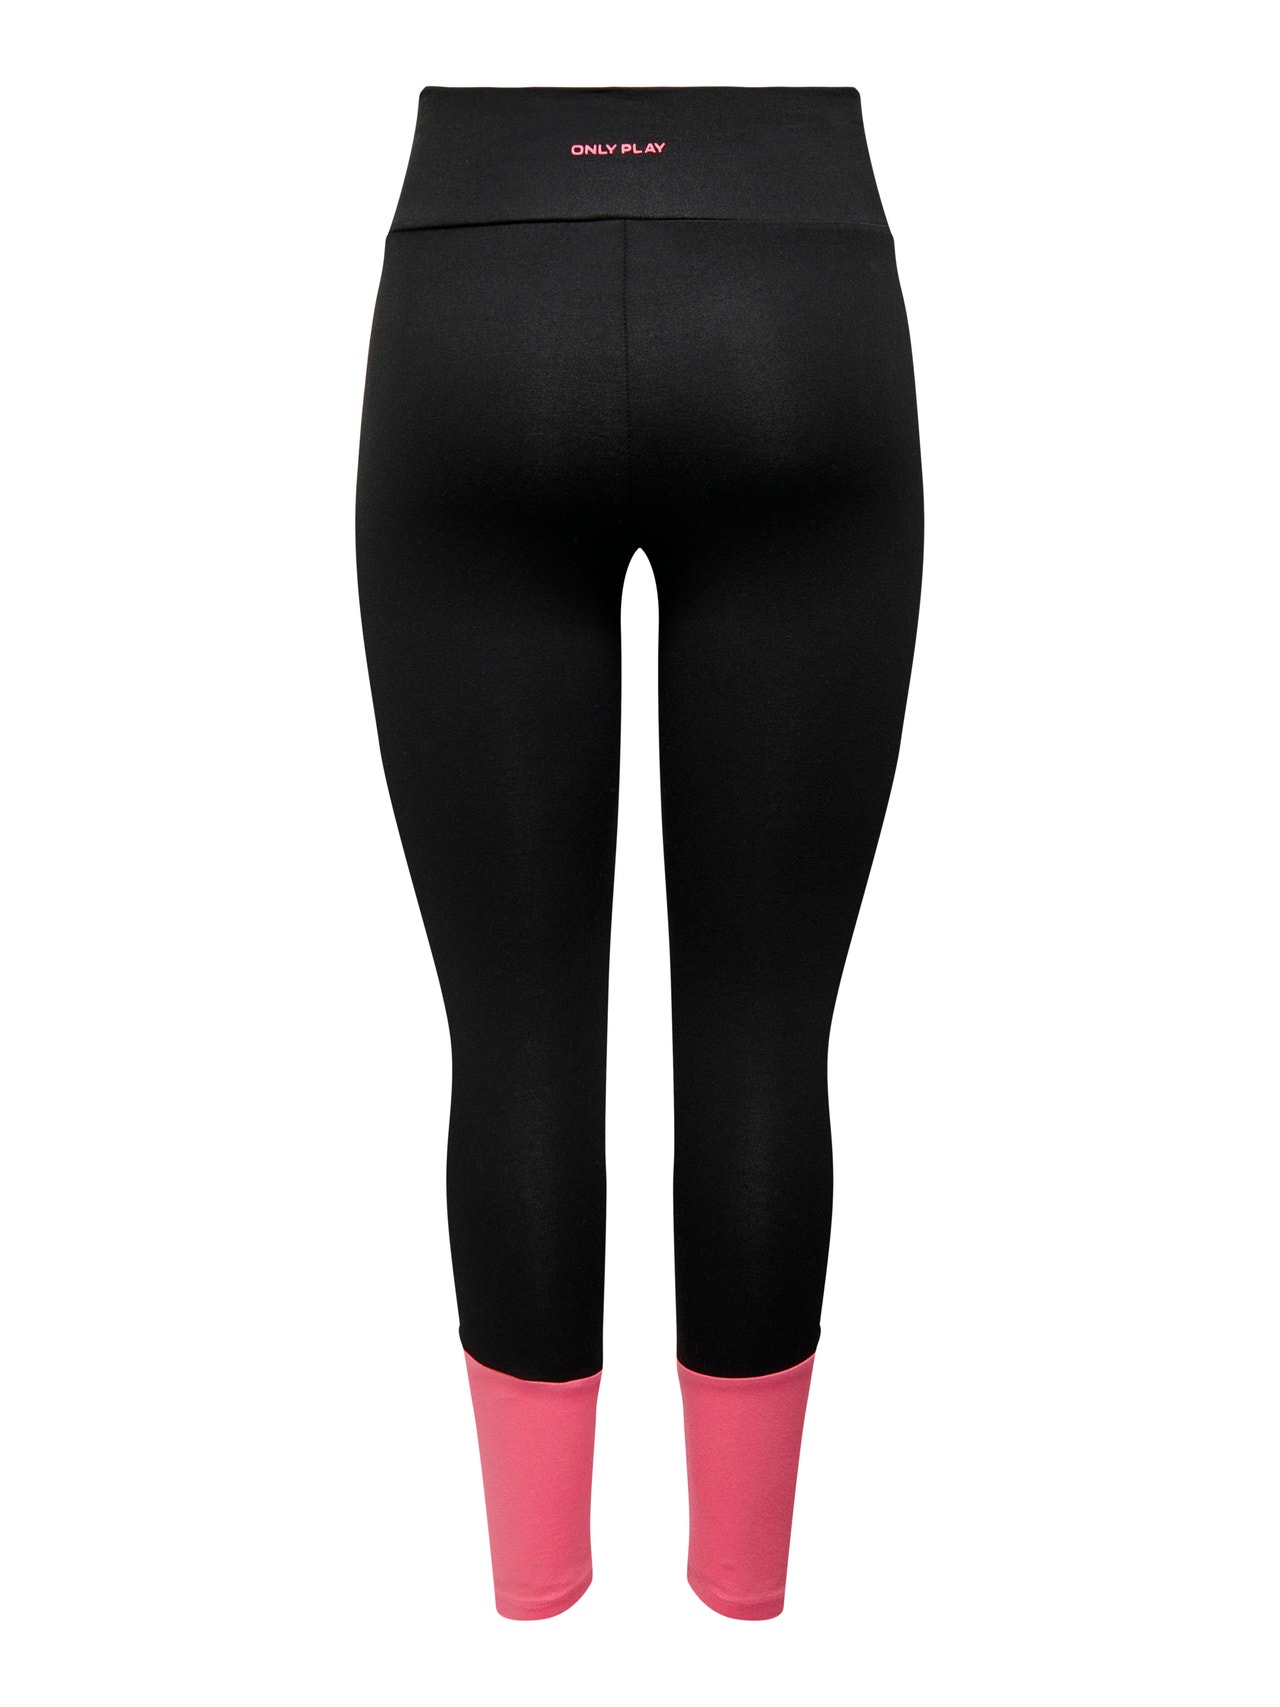 ONLY Tight Fit High waist Leggings -Black - 15281014